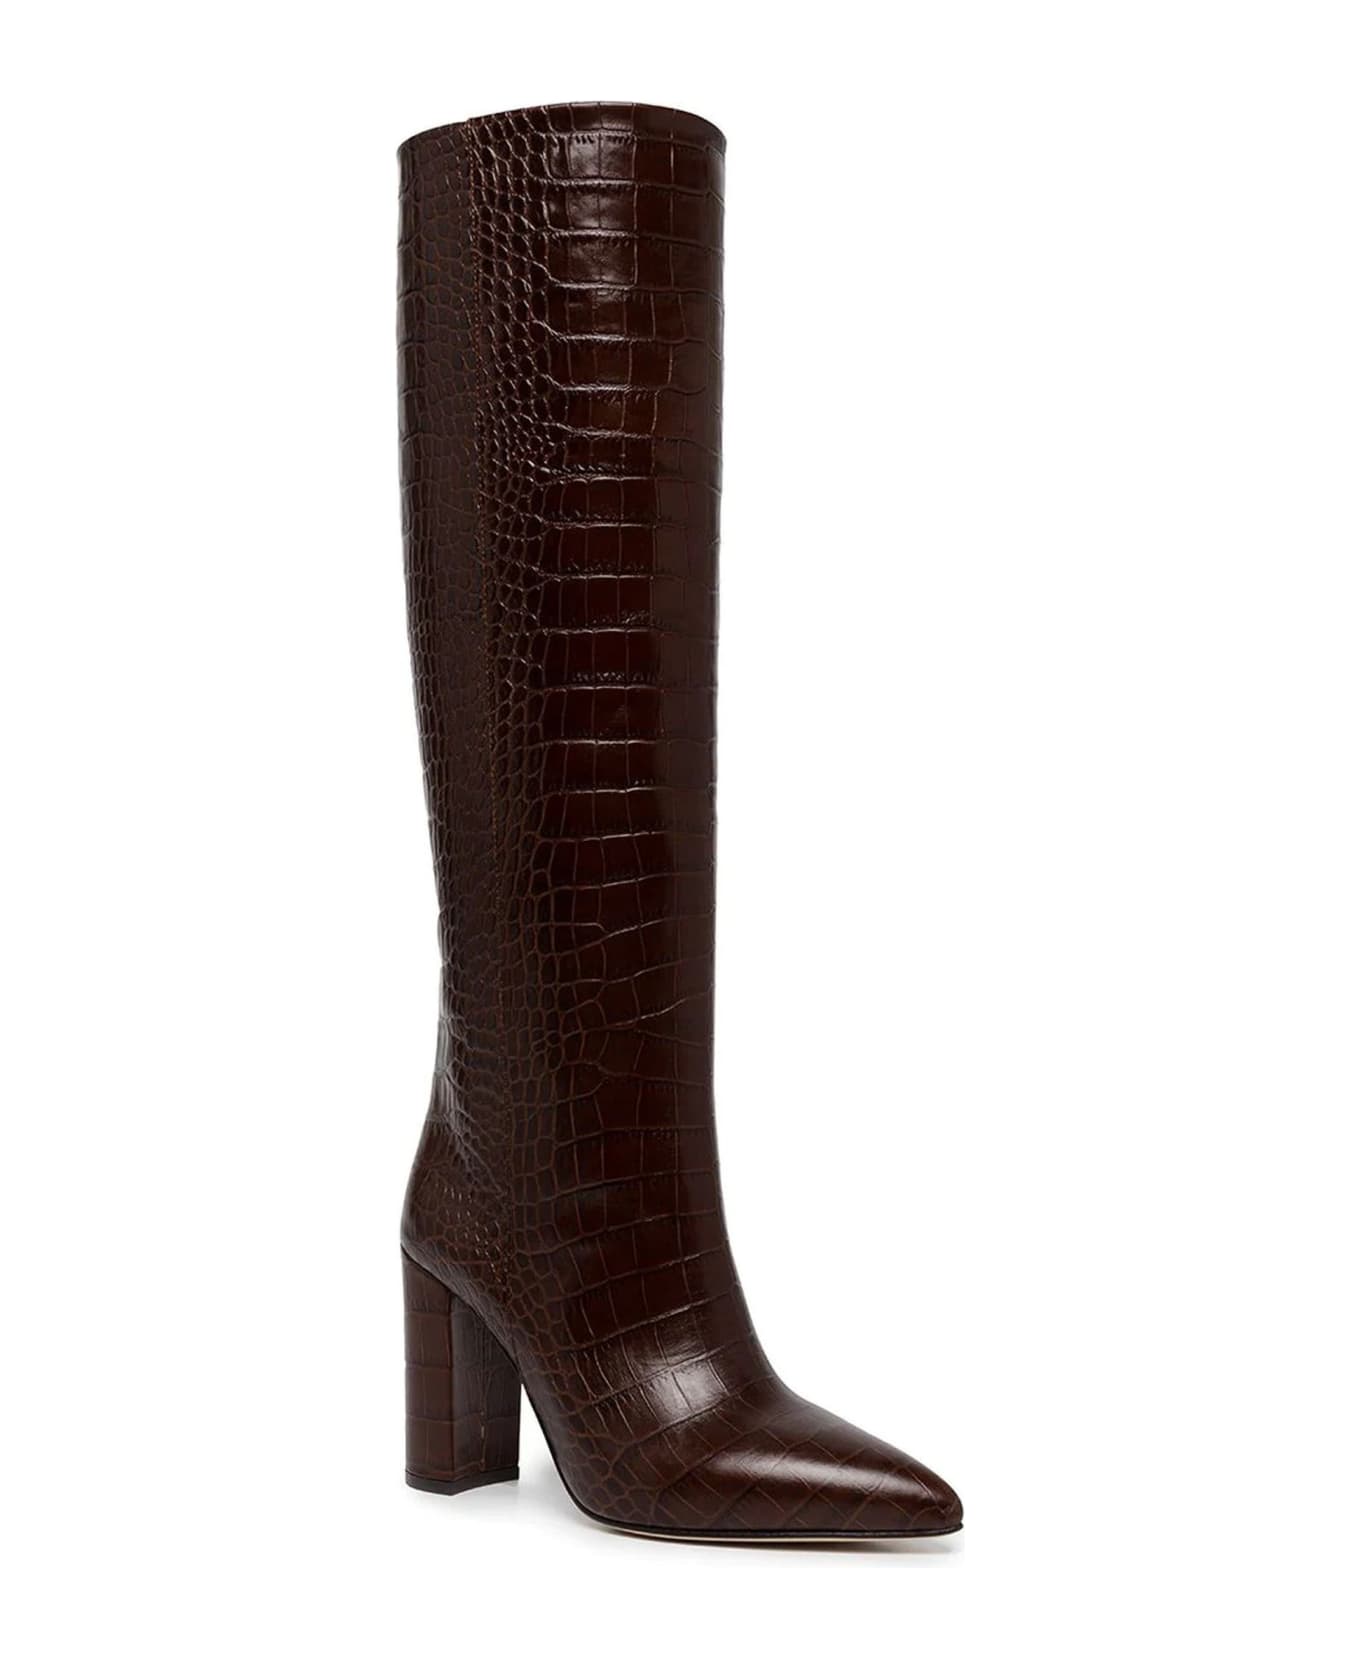 Paris Texas Brown Leather High Boots - Marrone